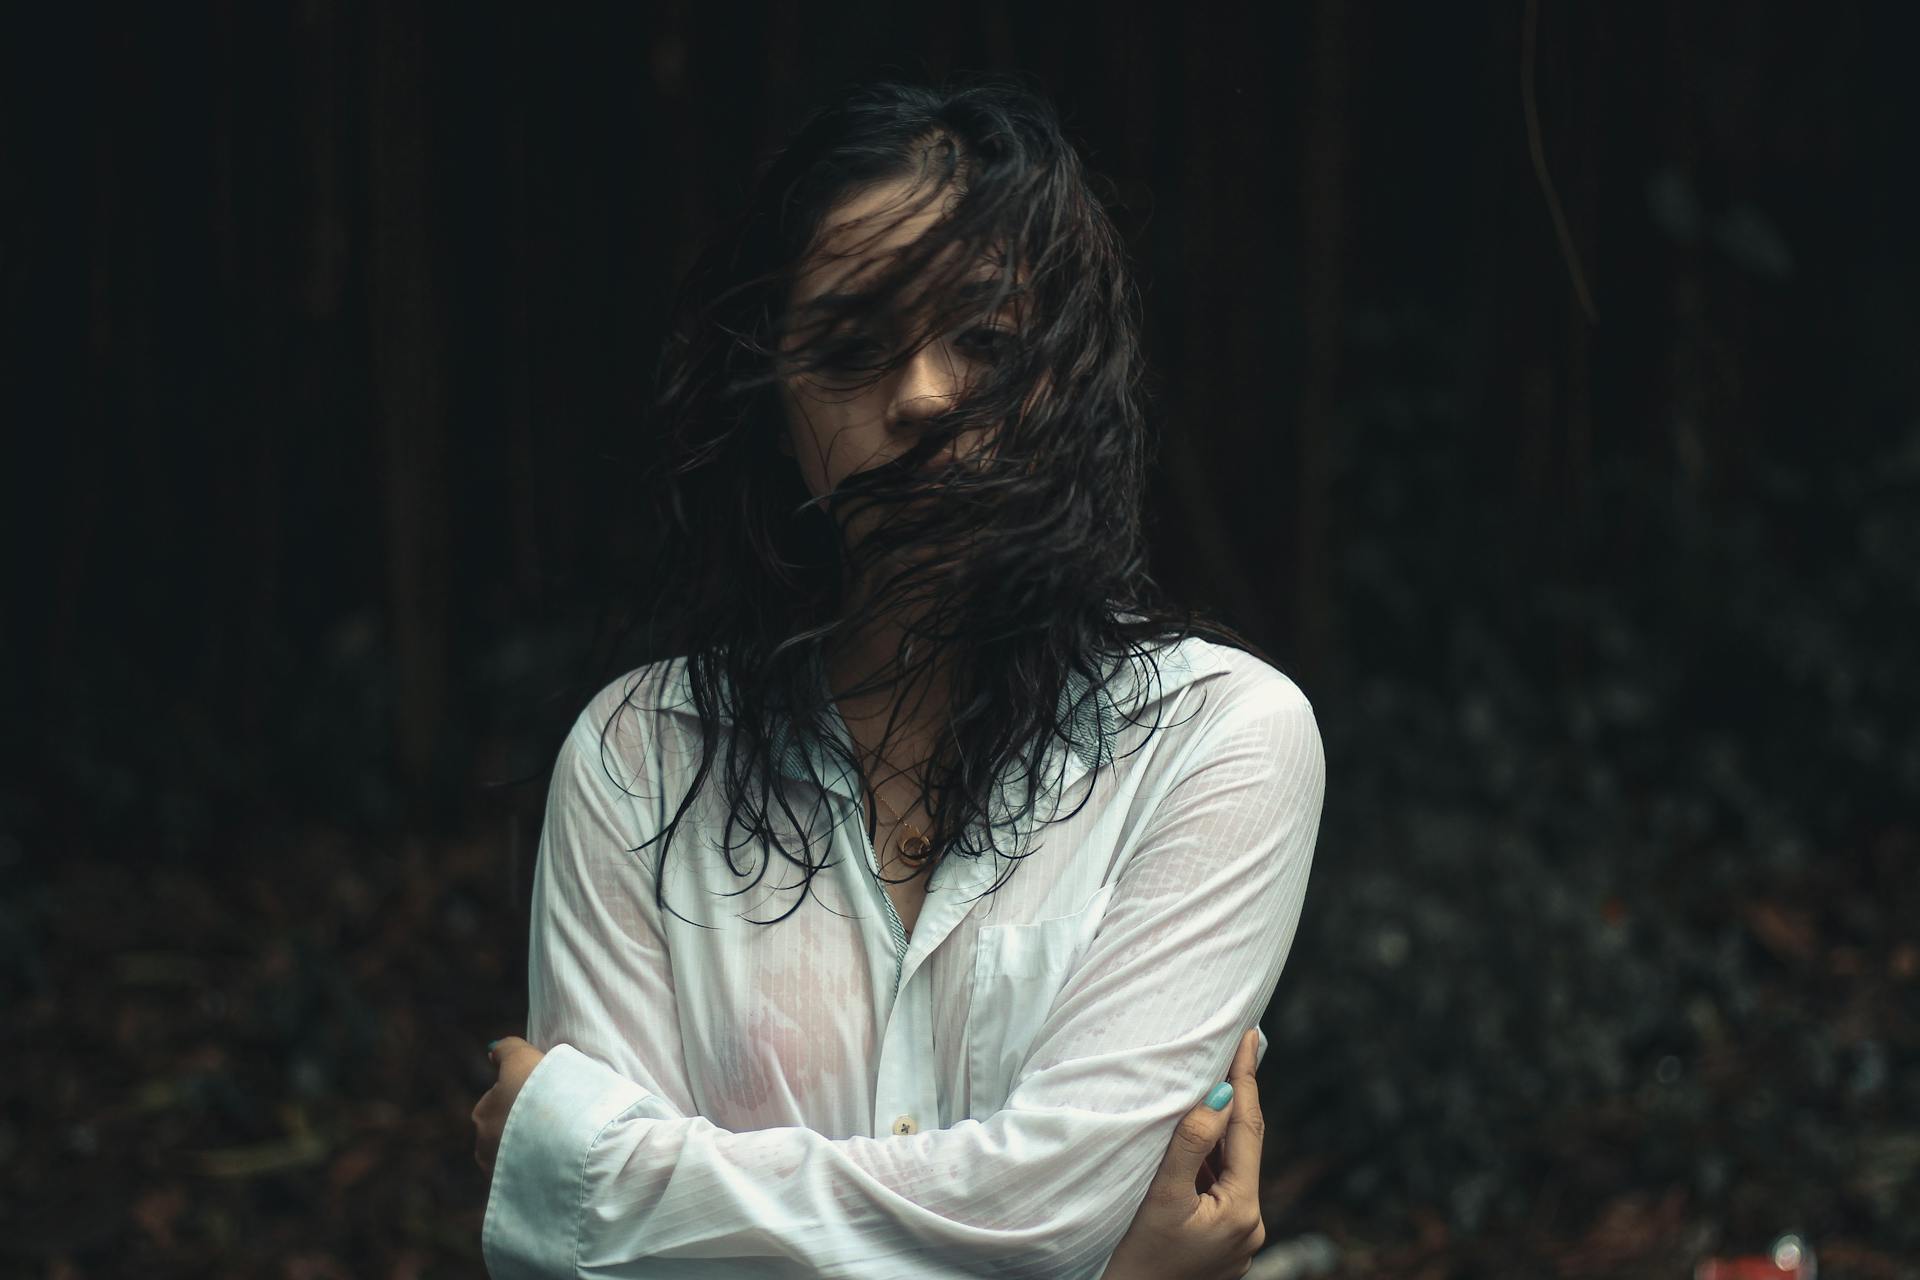 A woman with wet hair | Source: Pexels